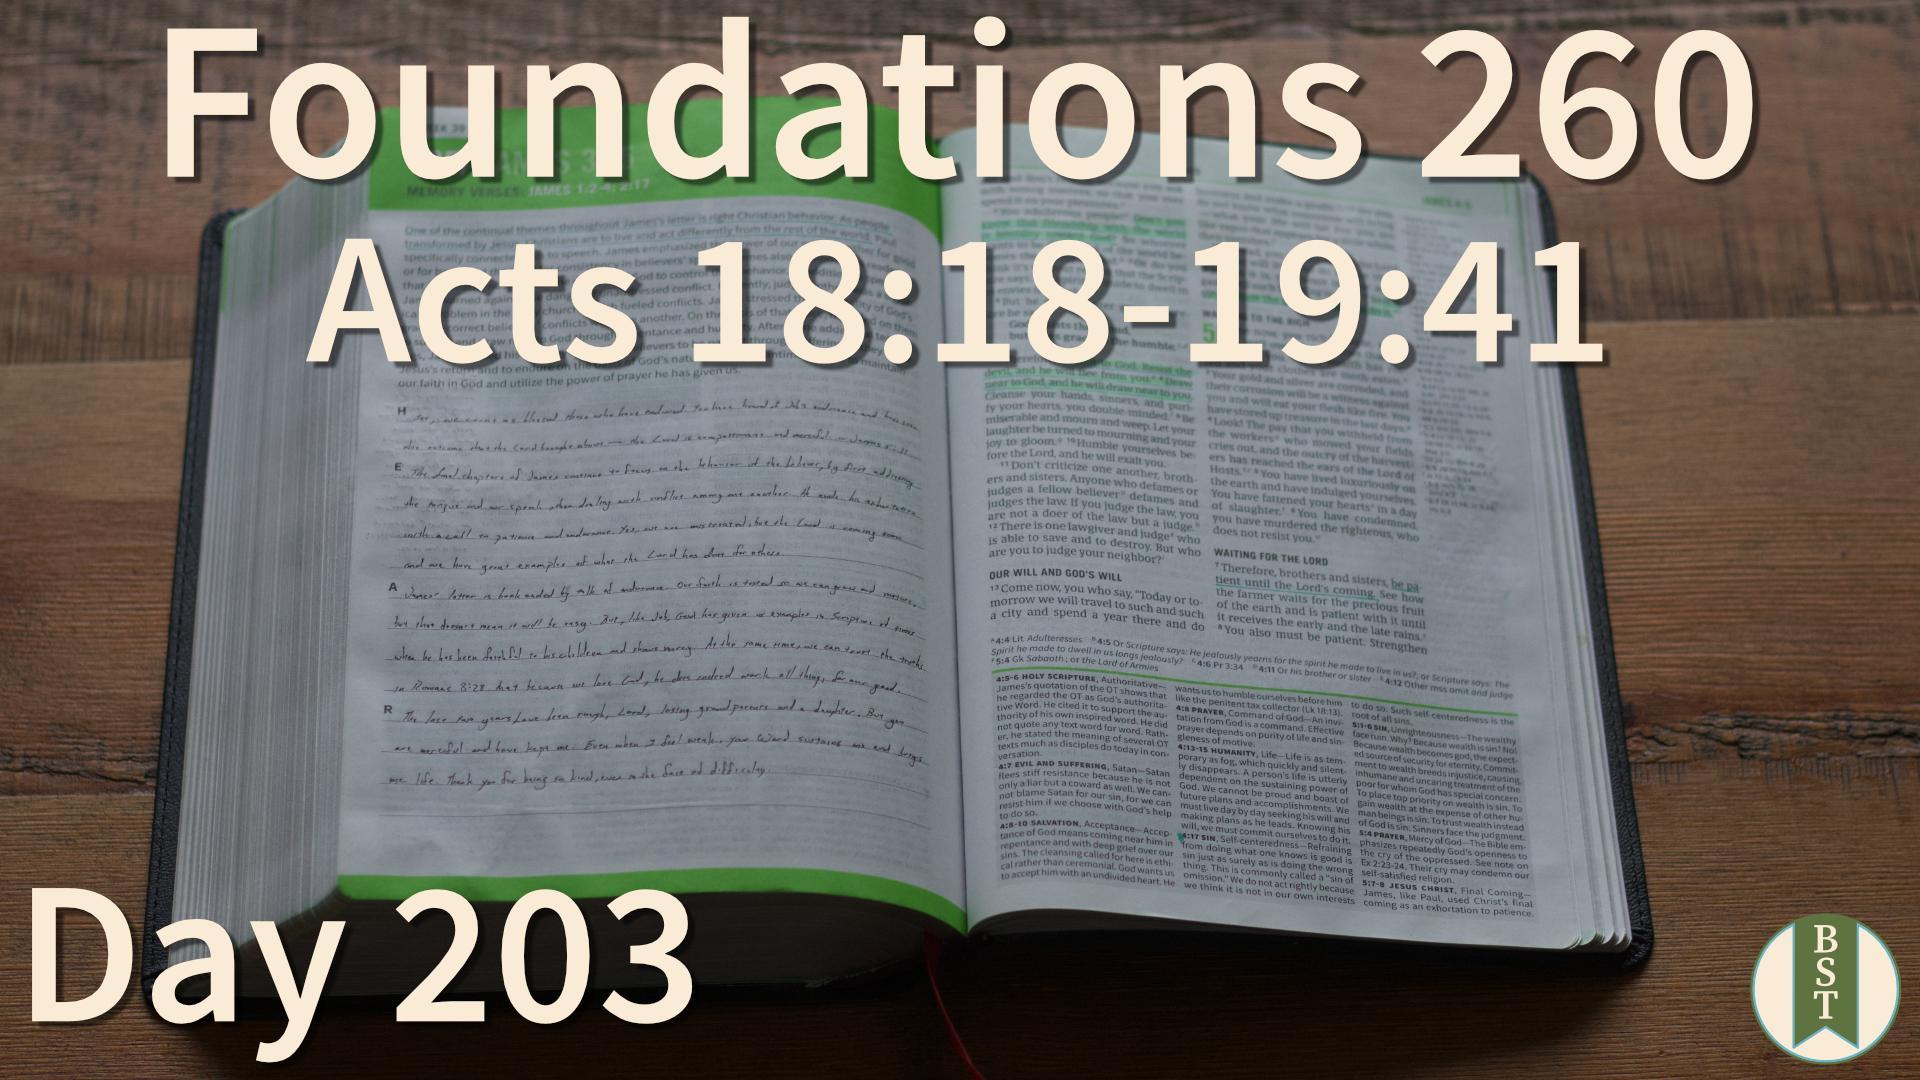 F260 Day 203: Acts 18:18-19:41